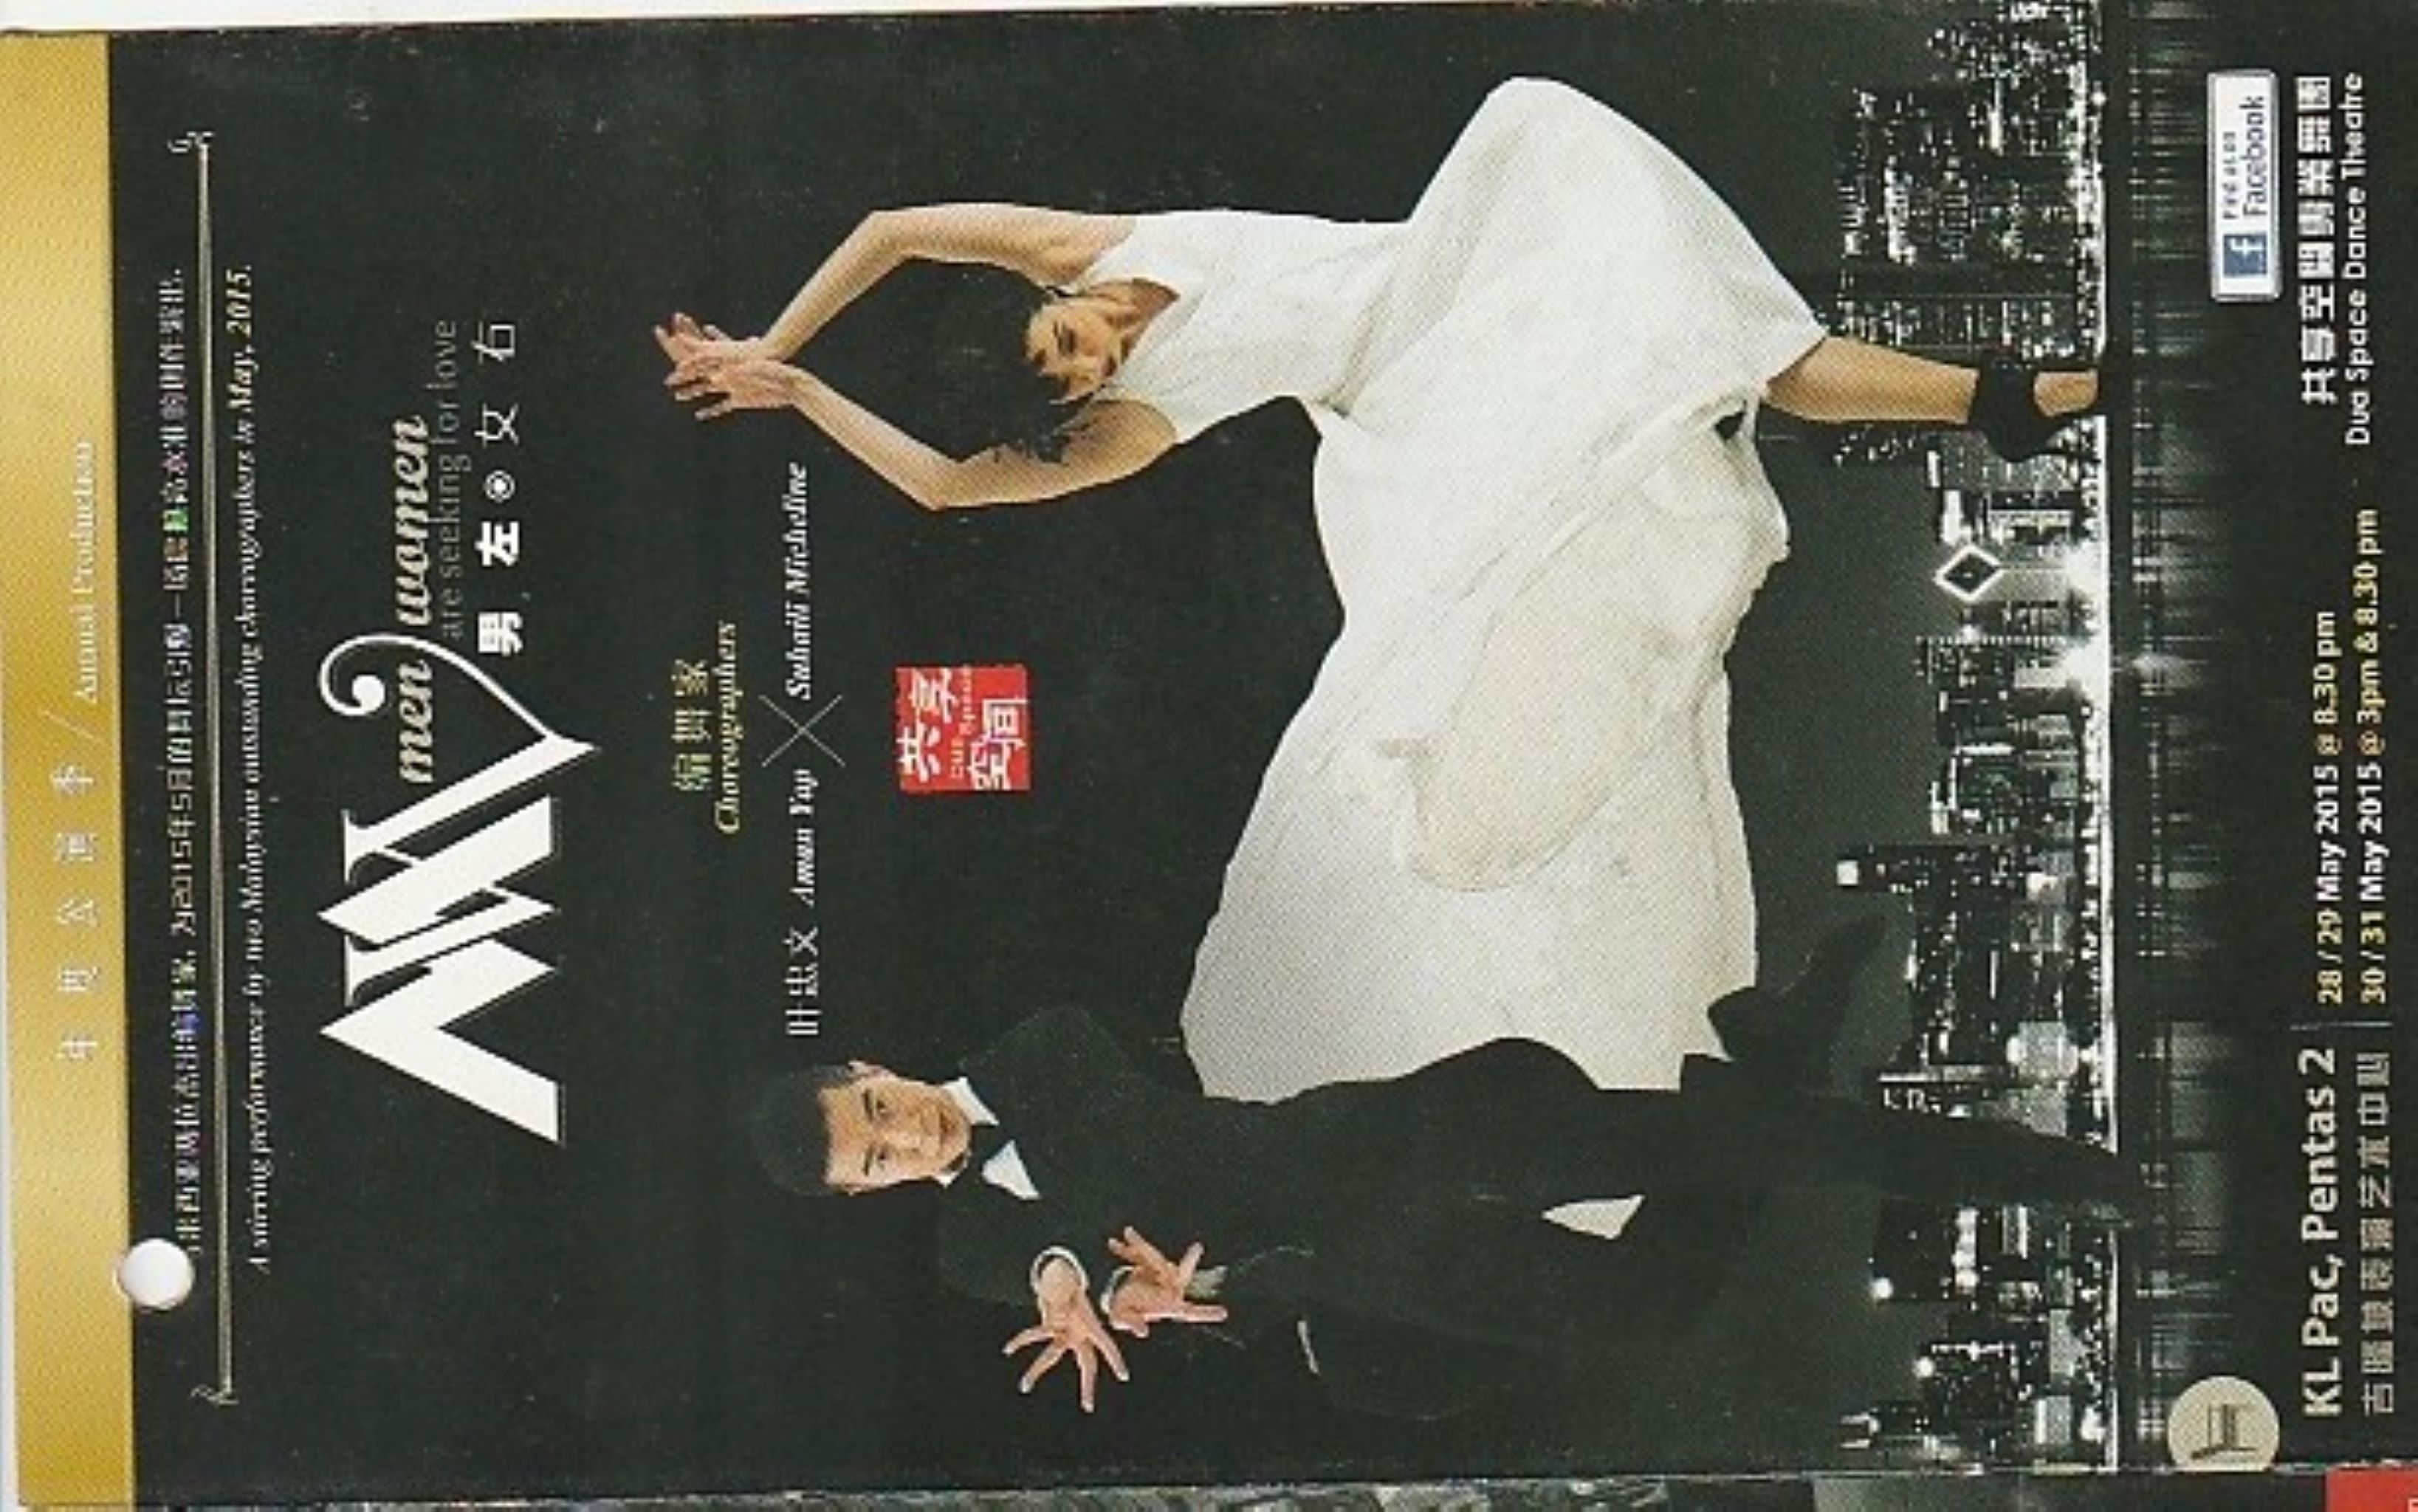 2015 MW Cover